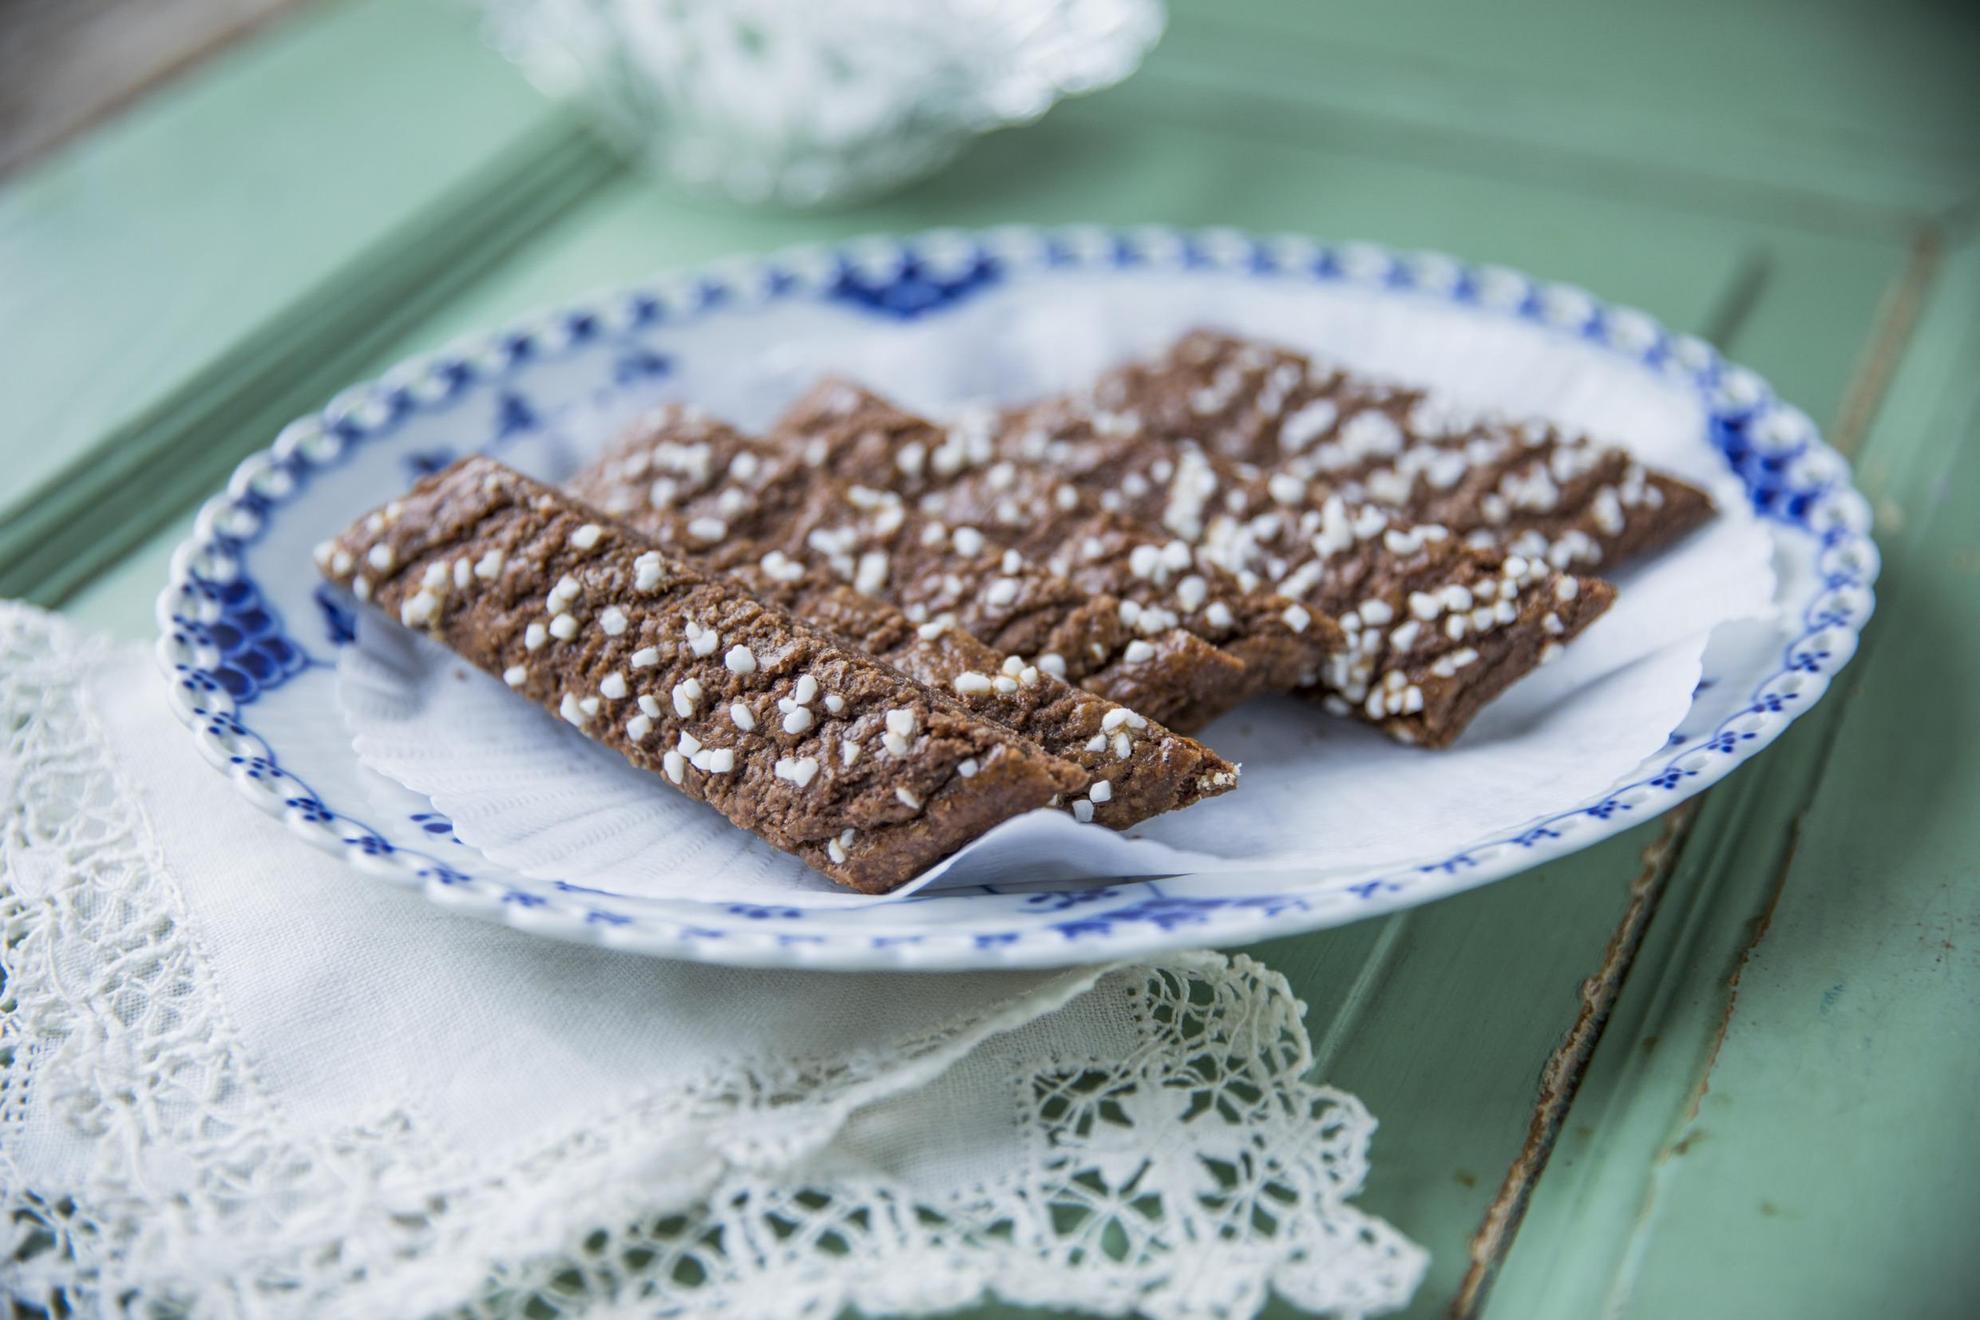 A plate with 'Chokladsnittar' (chocolate slices) cookies.